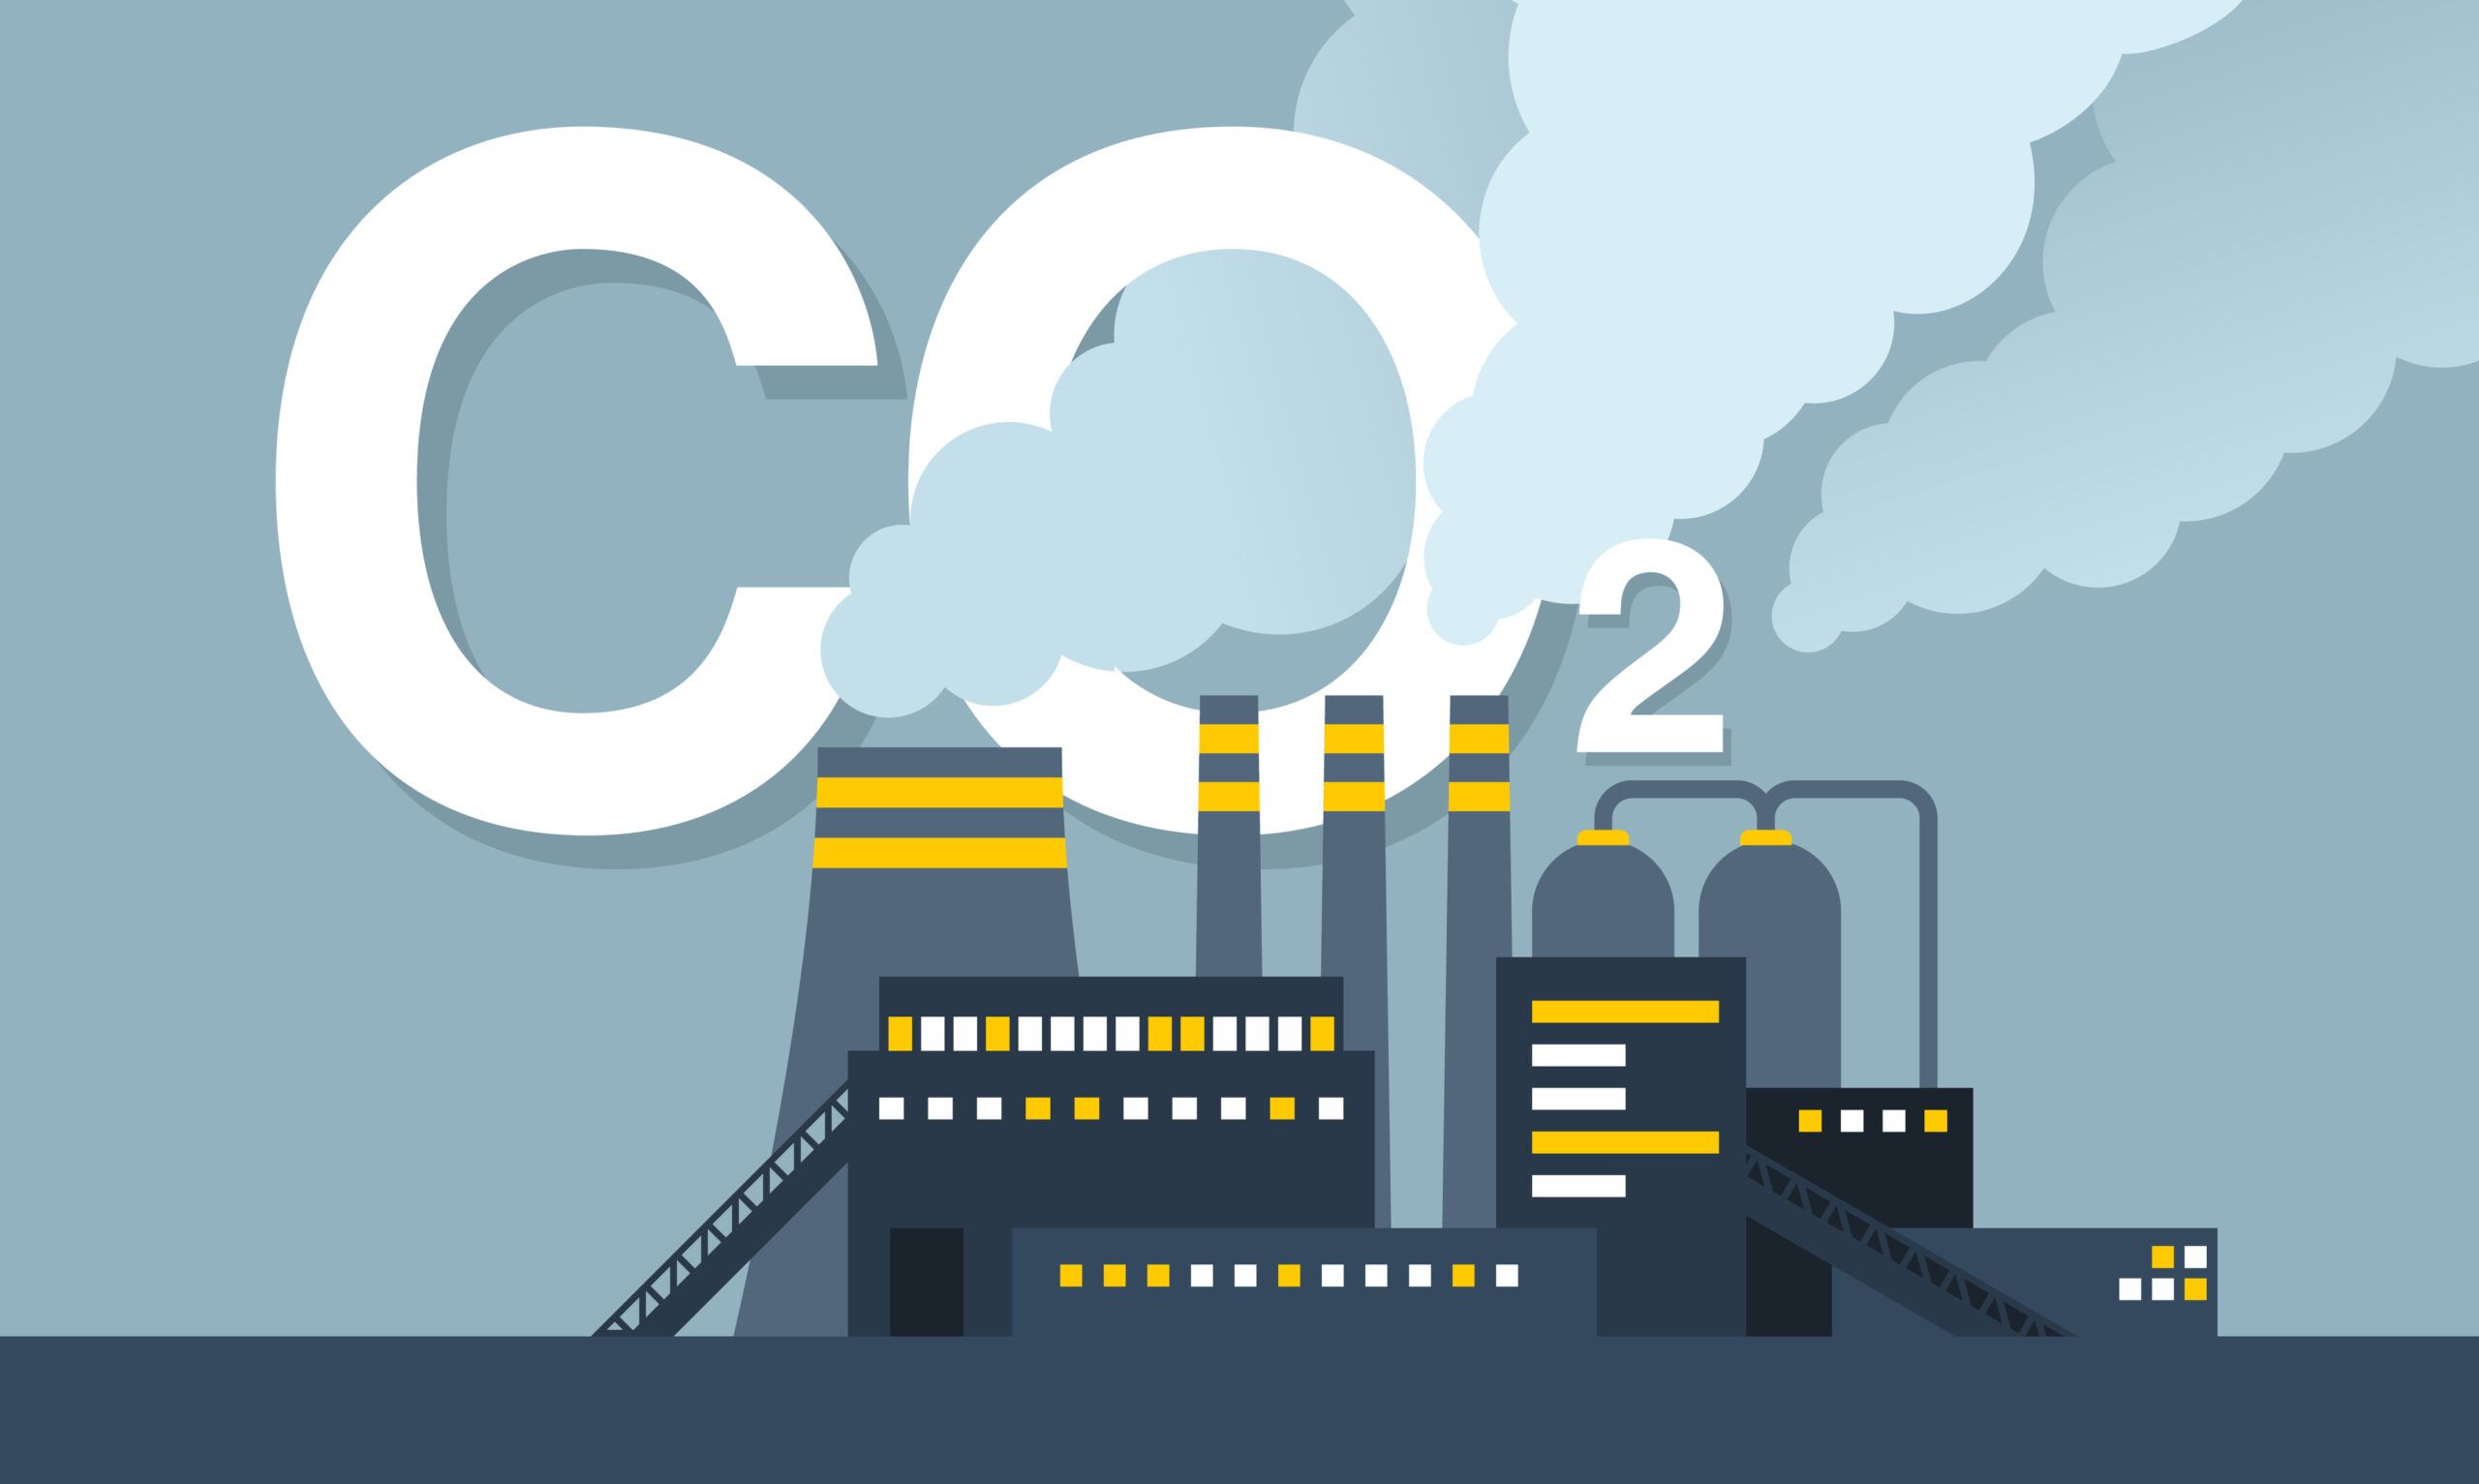 Co2,Emissions,Illustration,-,Harmful,Air,Carbon,Contamination,Emblem,With